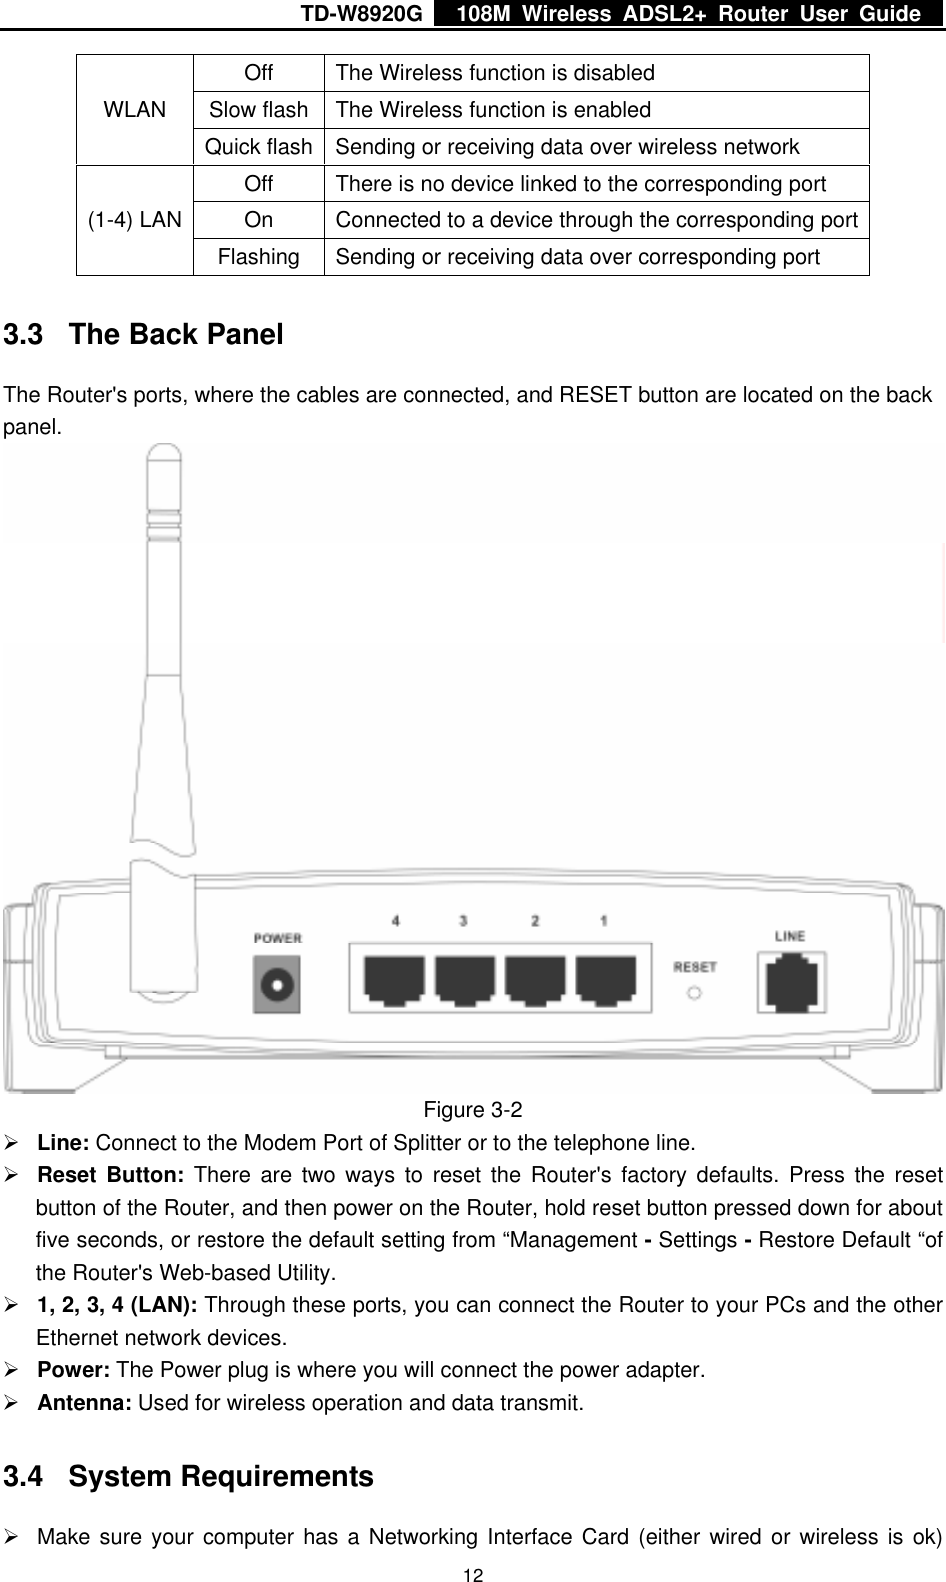 TD-W8920G    108M Wireless ADSL2+ Router User Guide    12Off  The Wireless function is disabled Slow flash  The Wireless function is enabled WLAN Quick flash  Sending or receiving data over wireless network Off  There is no device linked to the corresponding port On  Connected to a device through the corresponding port (1-4) LAN Flashing  Sending or receiving data over corresponding port 3.3  The Back Panel The Router&apos;s ports, where the cables are connected, and RESET button are located on the back panel.  Figure 3-2 ¾ Line: Connect to the Modem Port of Splitter or to the telephone line. ¾ Reset Button: There are two ways to reset the Router&apos;s factory defaults. Press the reset button of the Router, and then power on the Router, hold reset button pressed down for about five seconds, or restore the default setting from “Management - Settings - Restore Default “of the Router&apos;s Web-based Utility. ¾ 1, 2, 3, 4 (LAN): Through these ports, you can connect the Router to your PCs and the other Ethernet network devices. ¾ Power: The Power plug is where you will connect the power adapter. ¾ Antenna: Used for wireless operation and data transmit. 3.4 System Requirements ¾  Make sure your computer has a Networking Interface Card (either wired or wireless is ok) 